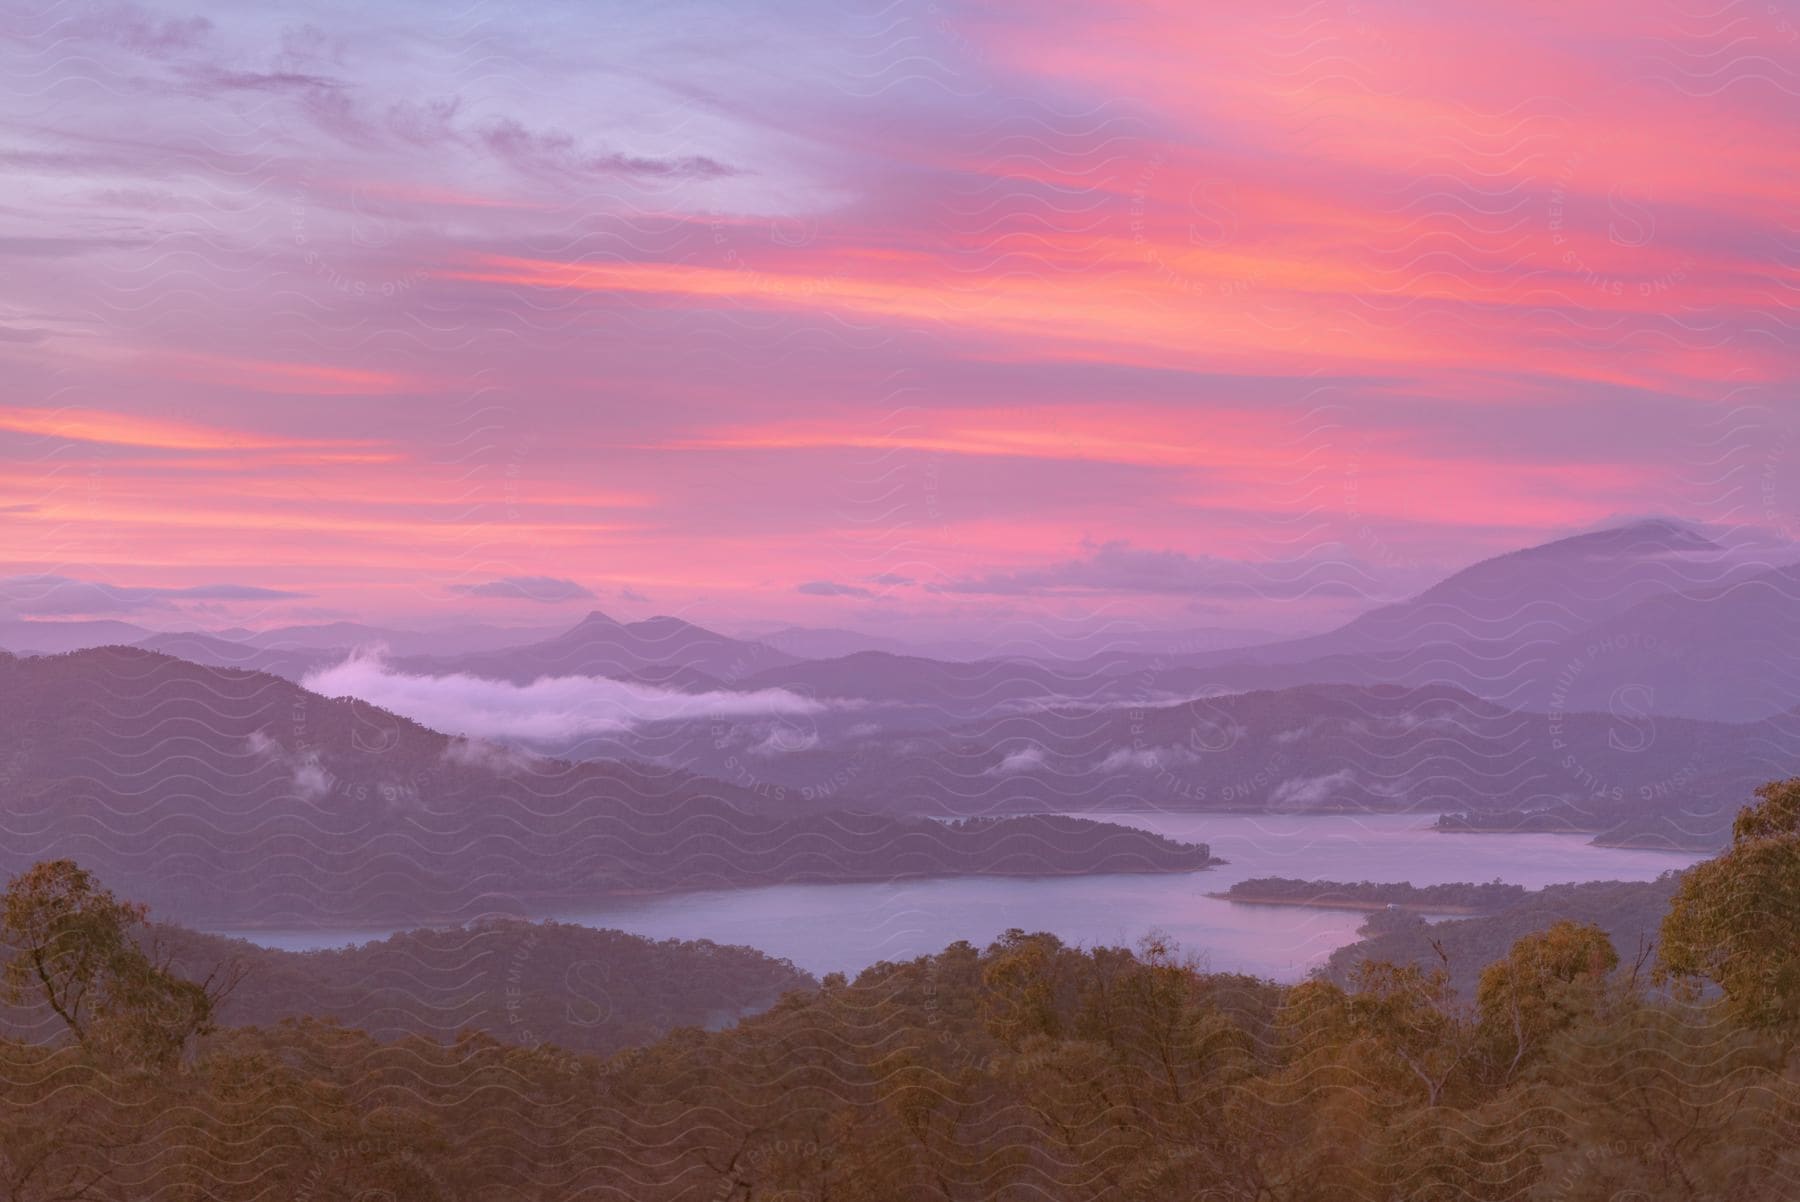 A scenic landscape at dawn or dusk, with vibrant shades of pink and purple in the sky, mist over wooded mountains and a calm lake reflecting the colors of the sky.